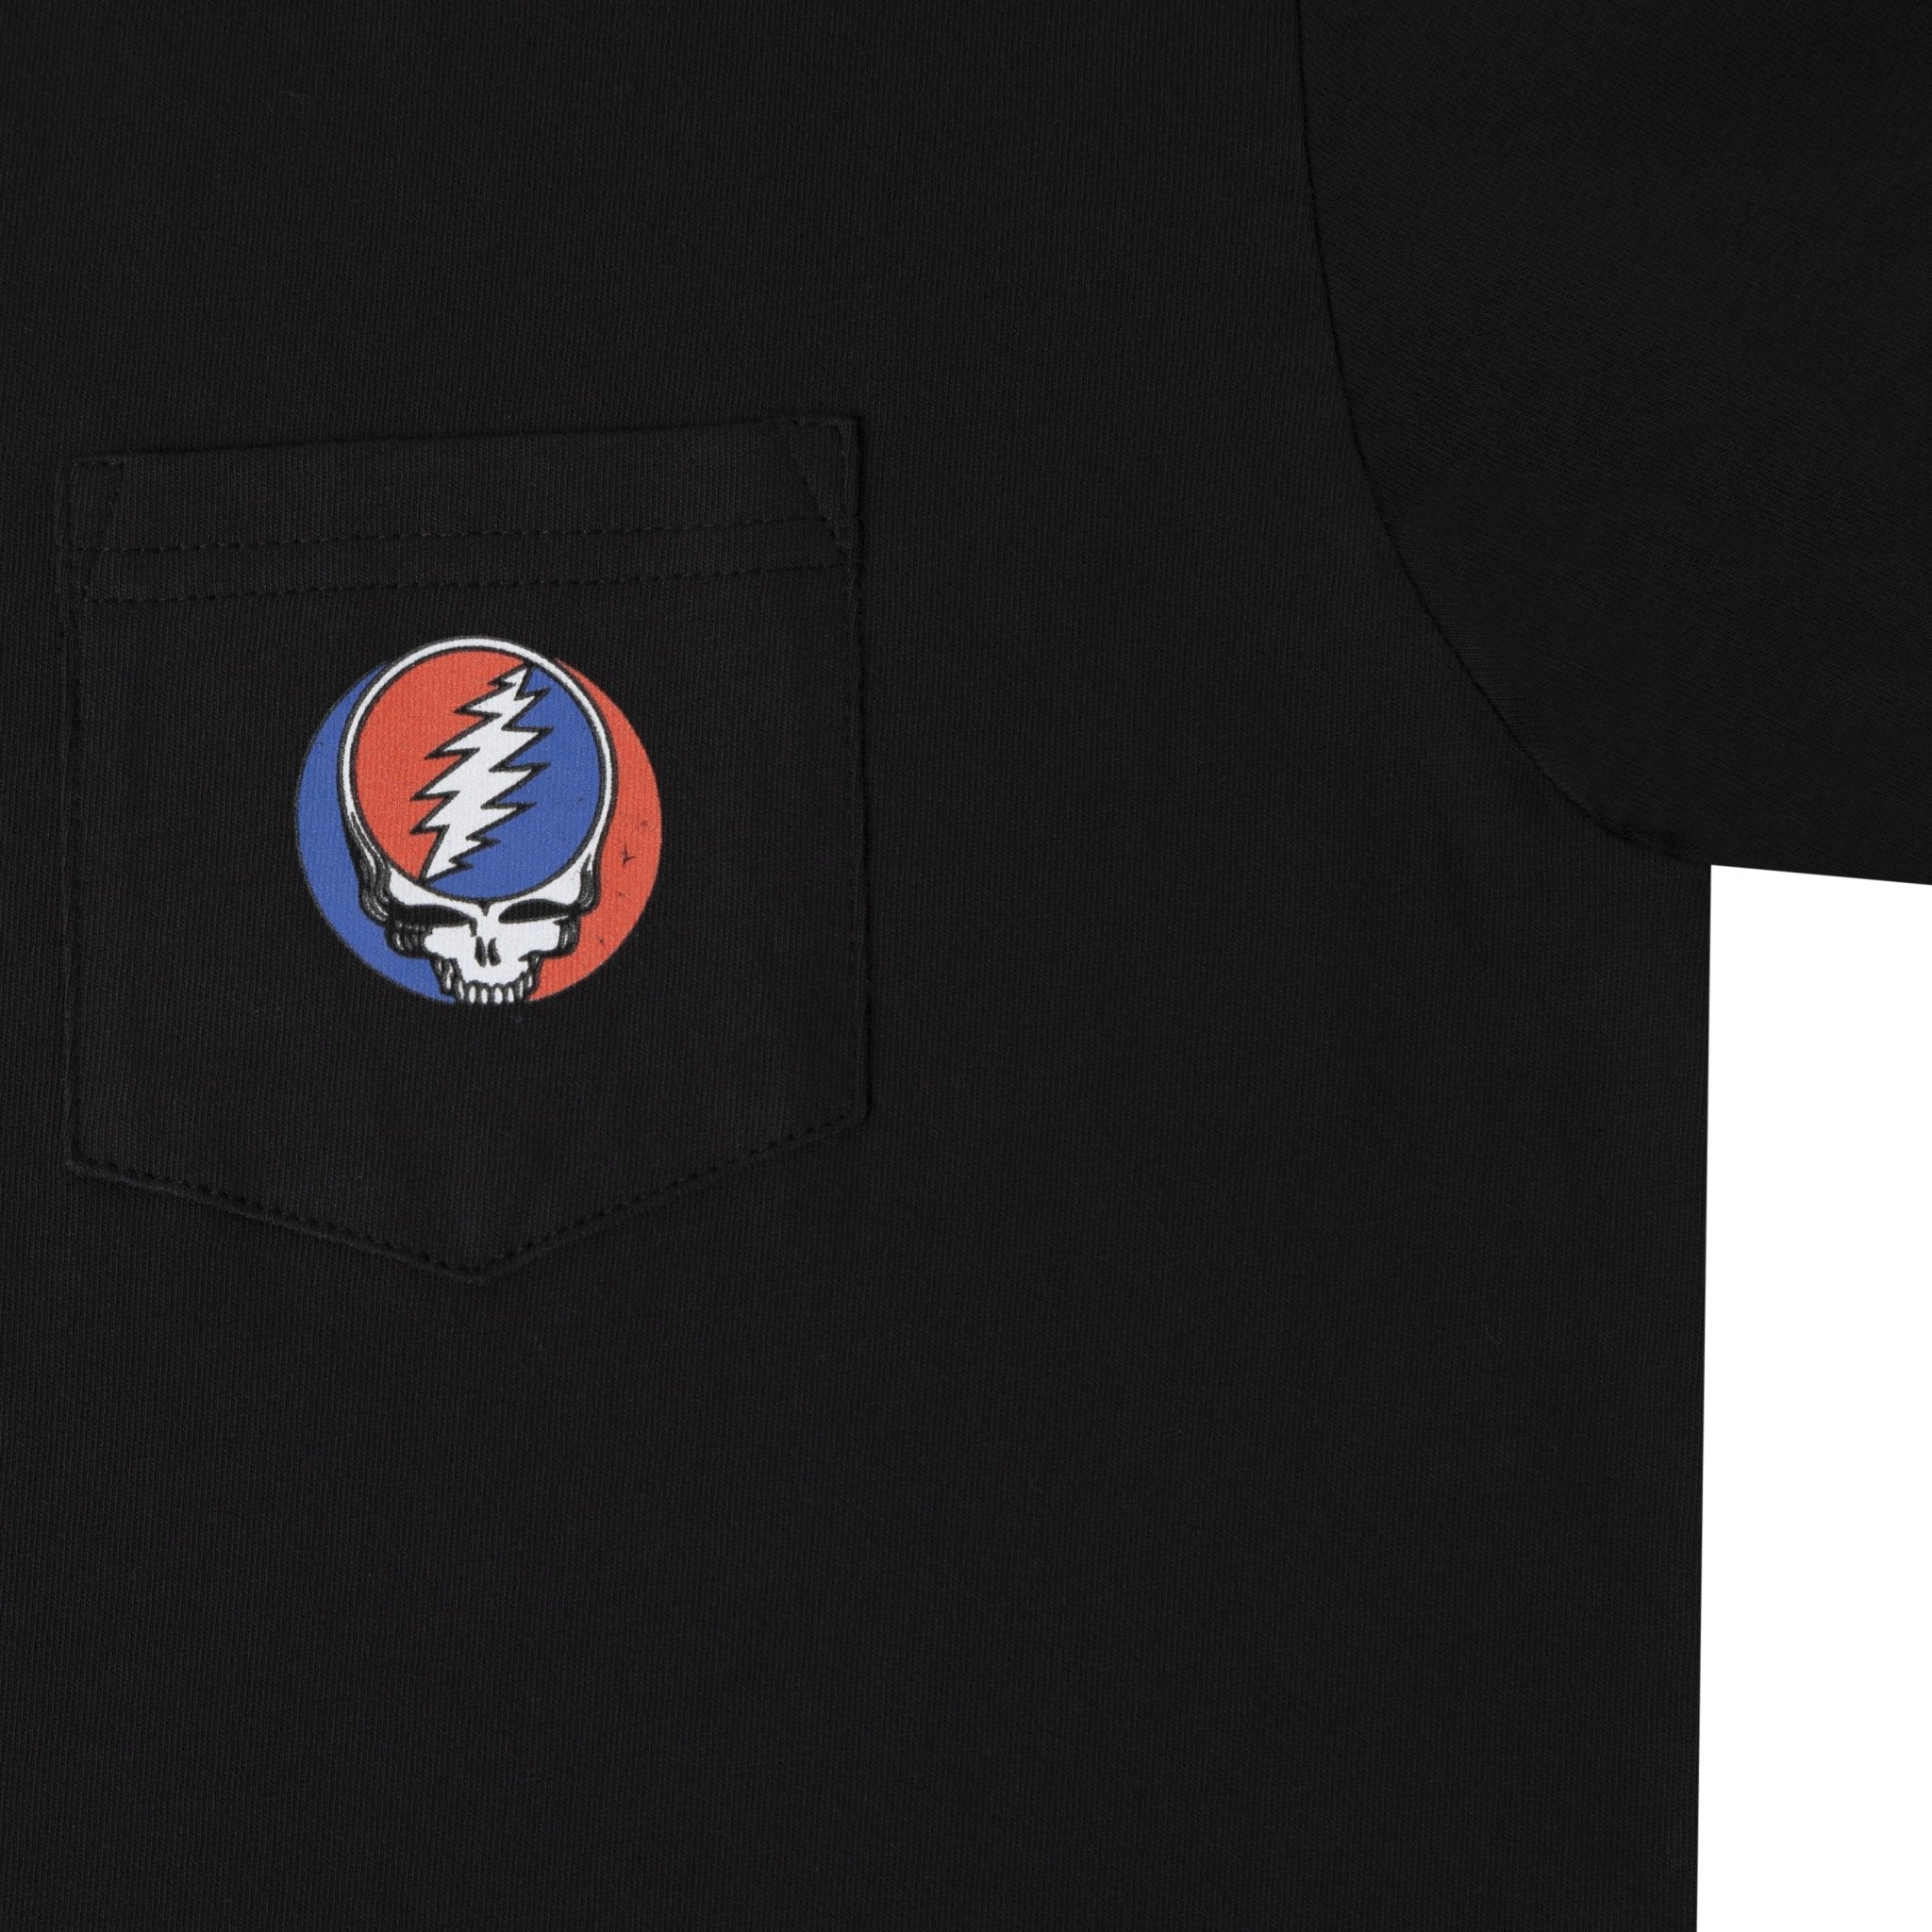 Grateful Dead x TGR Steal Your Face Organic Pocket Tee - Teton Gravity Research